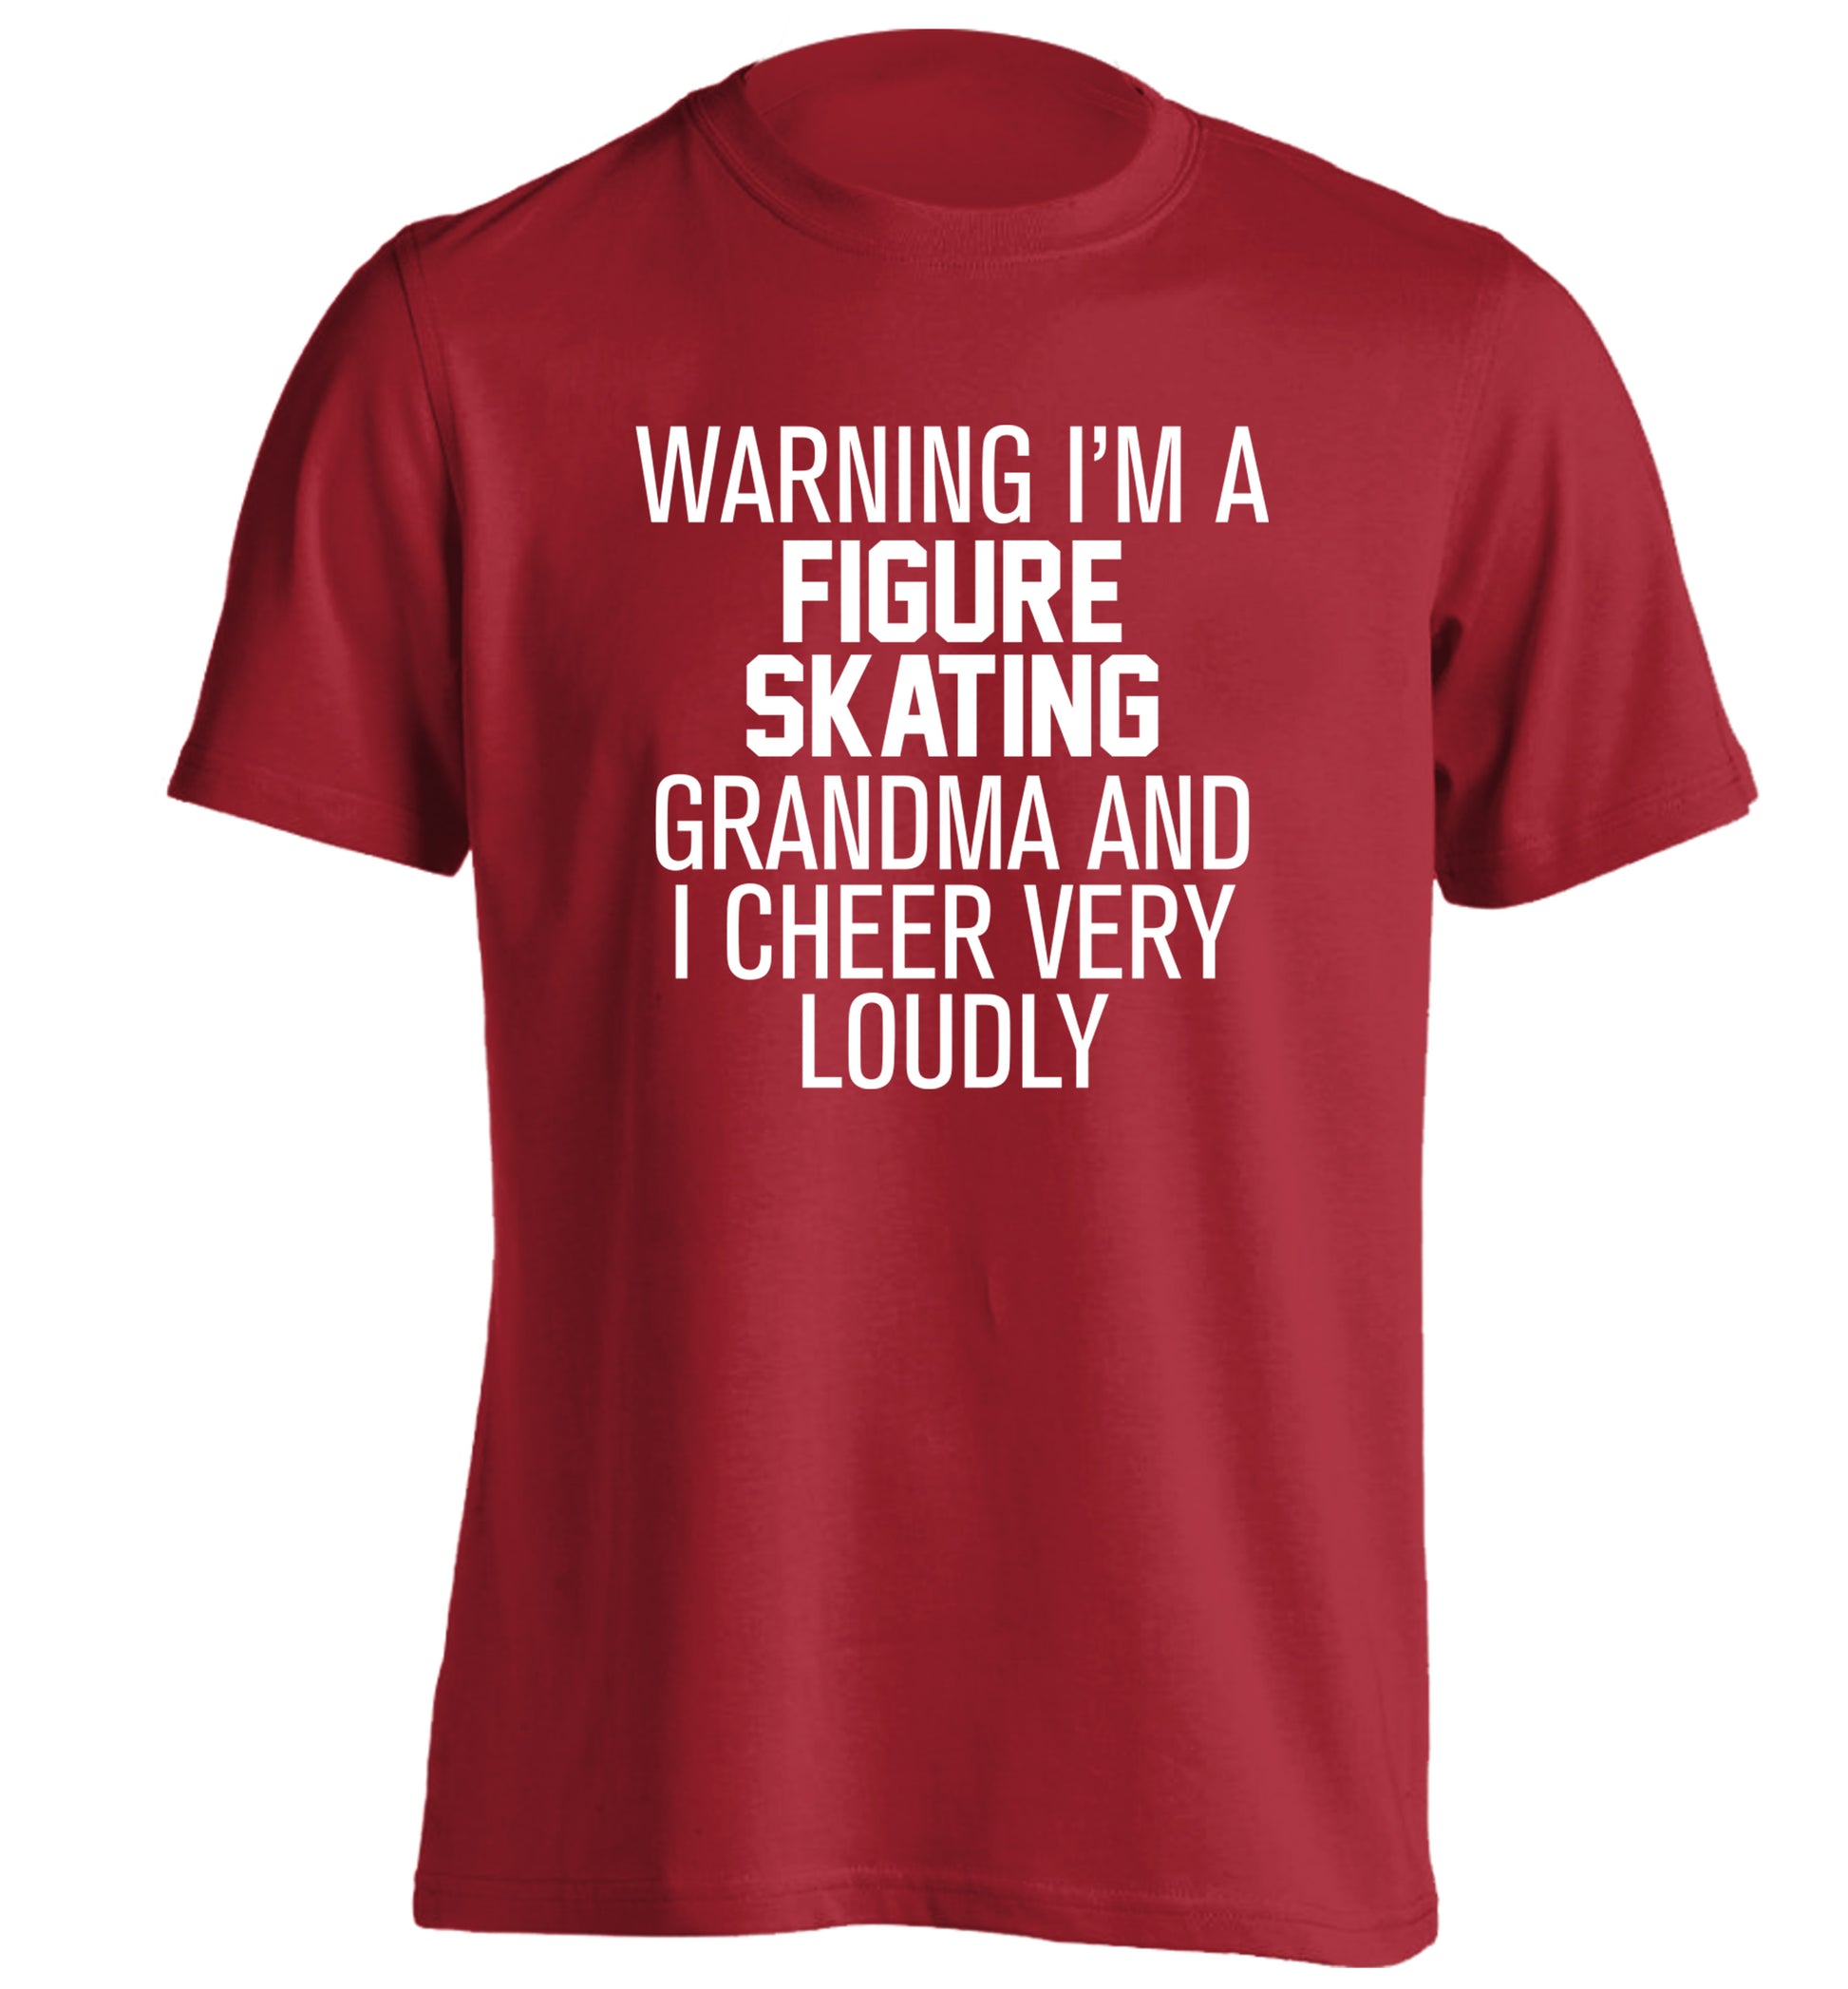 Warning I'm a figure skating grandma and I cheer very loudly adults unisexred Tshirt 2XL